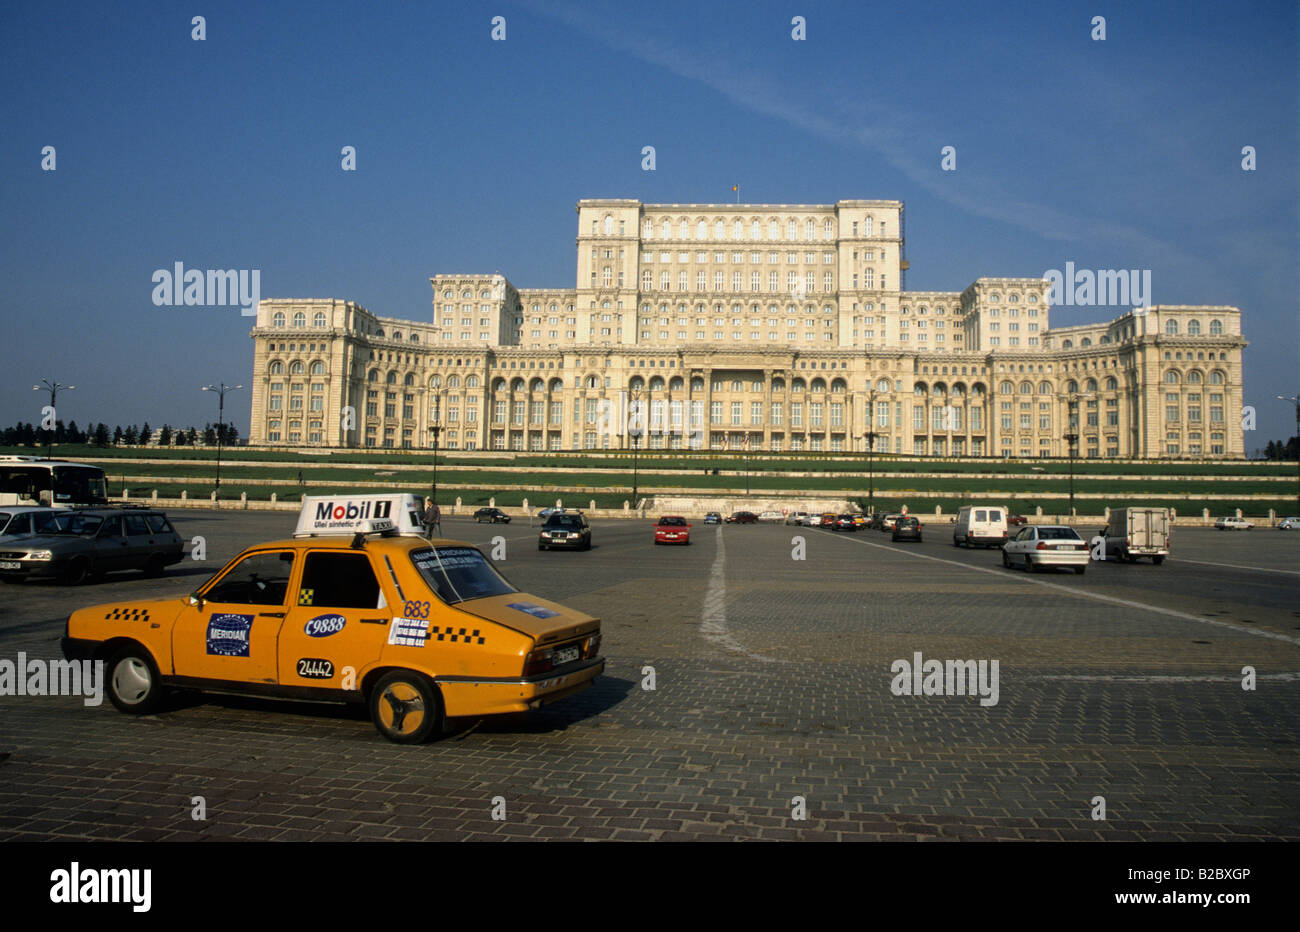 Monument to megalomania, the former palace of Ceausescu, now the Palace of the Parliament, Bucharest, Romania, Europe Stock Photo